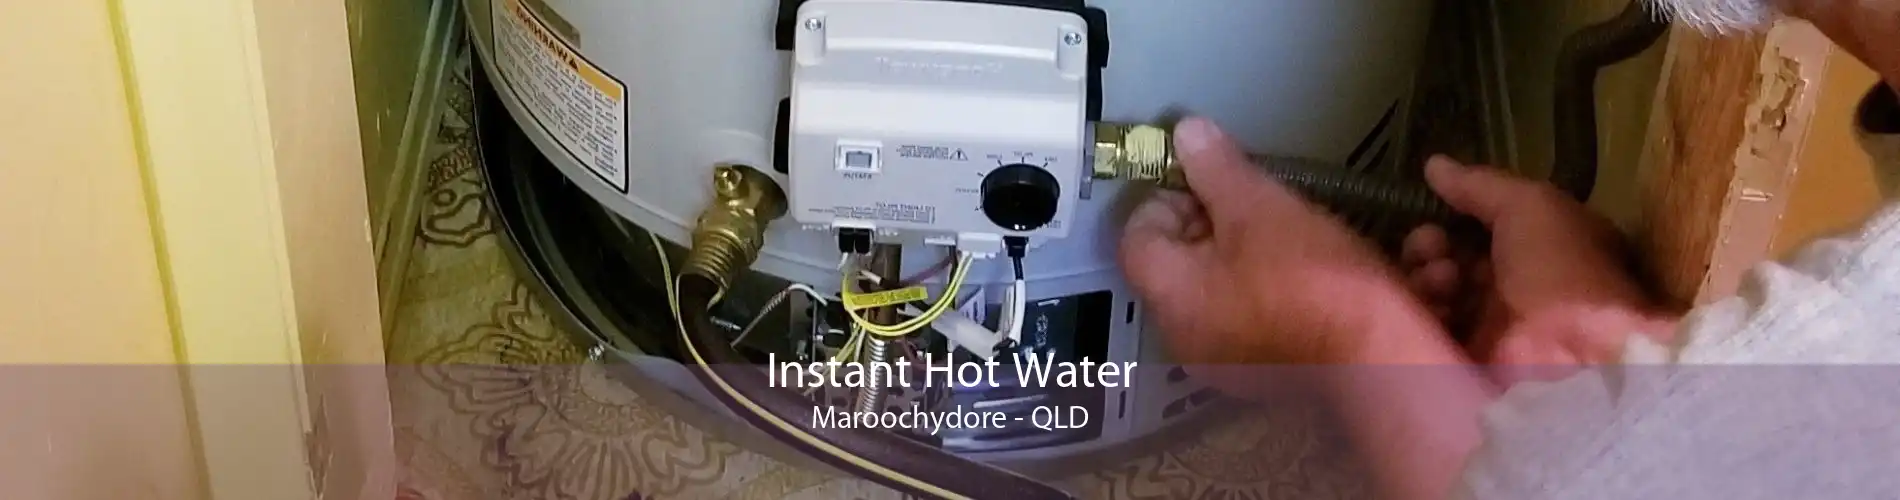 Instant Hot Water Maroochydore - QLD